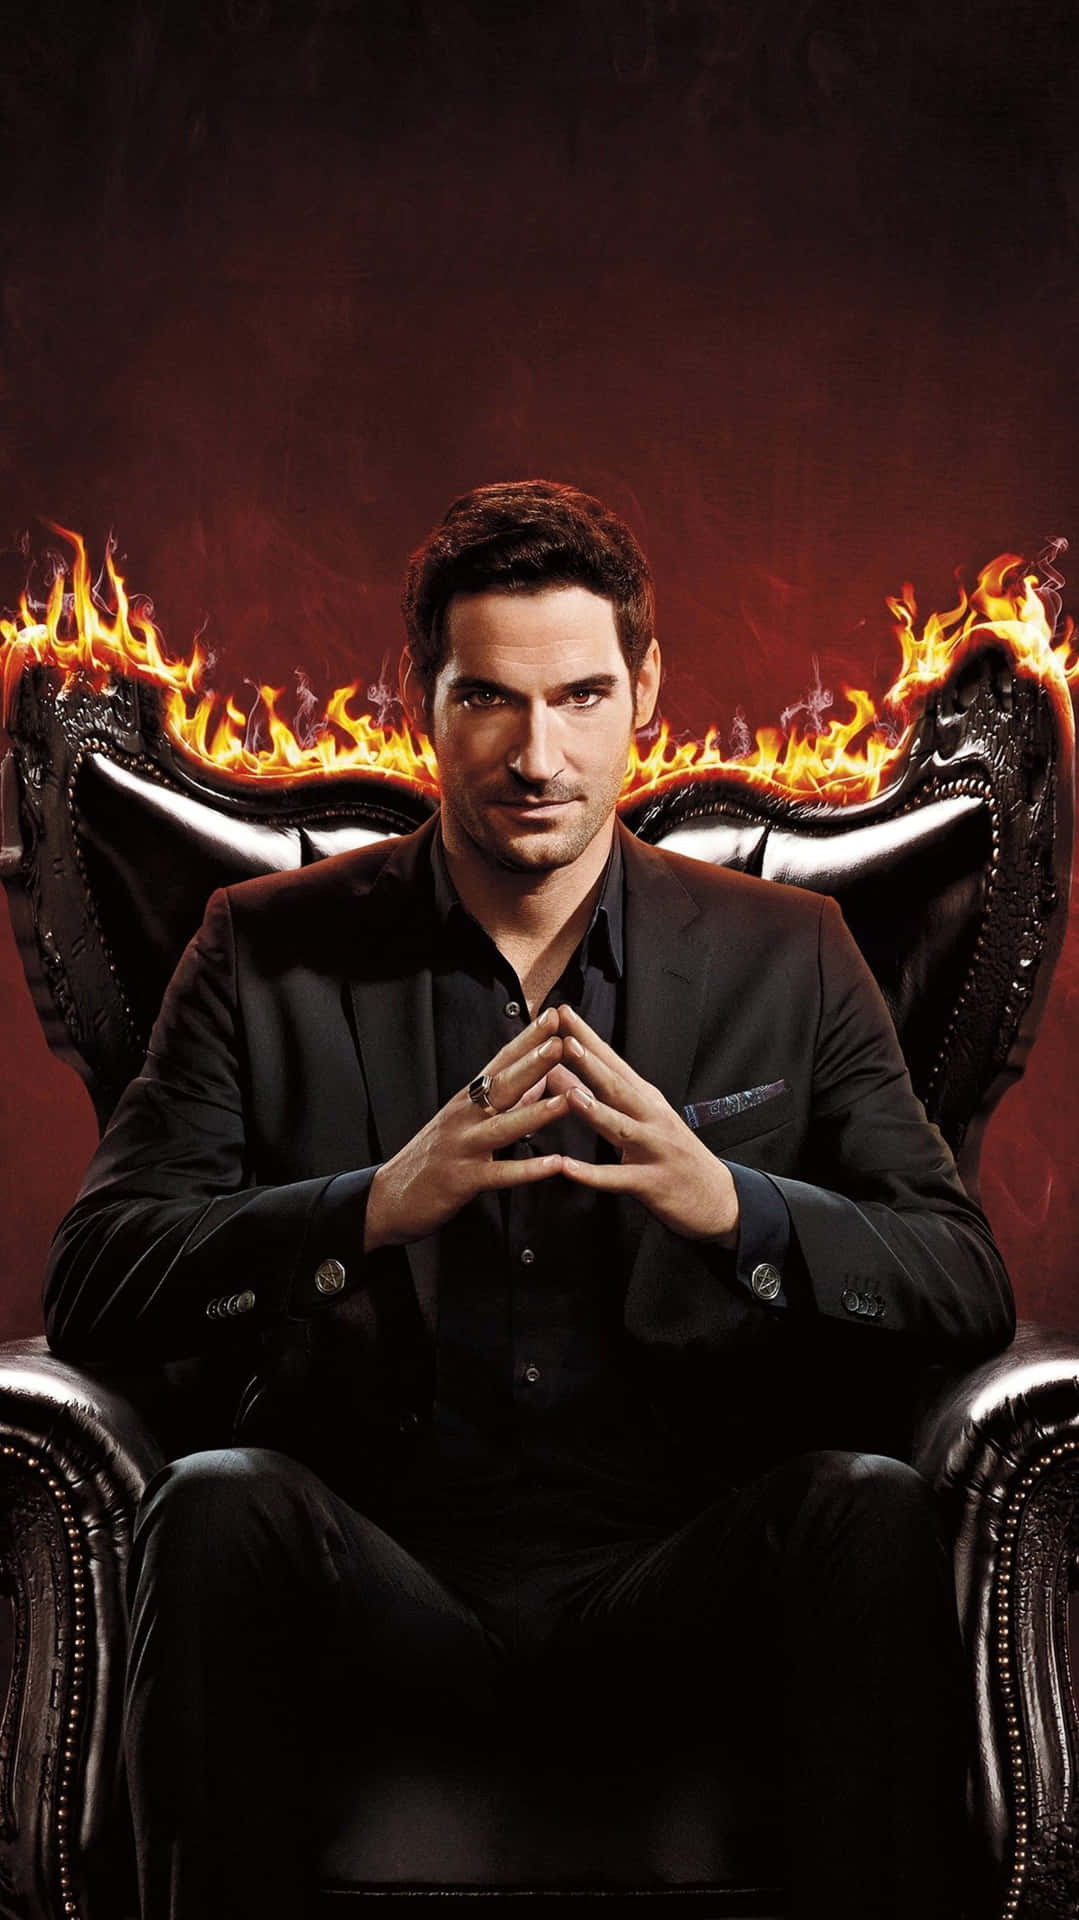 Discover the beauty of Lucifer's wings" Wallpaper